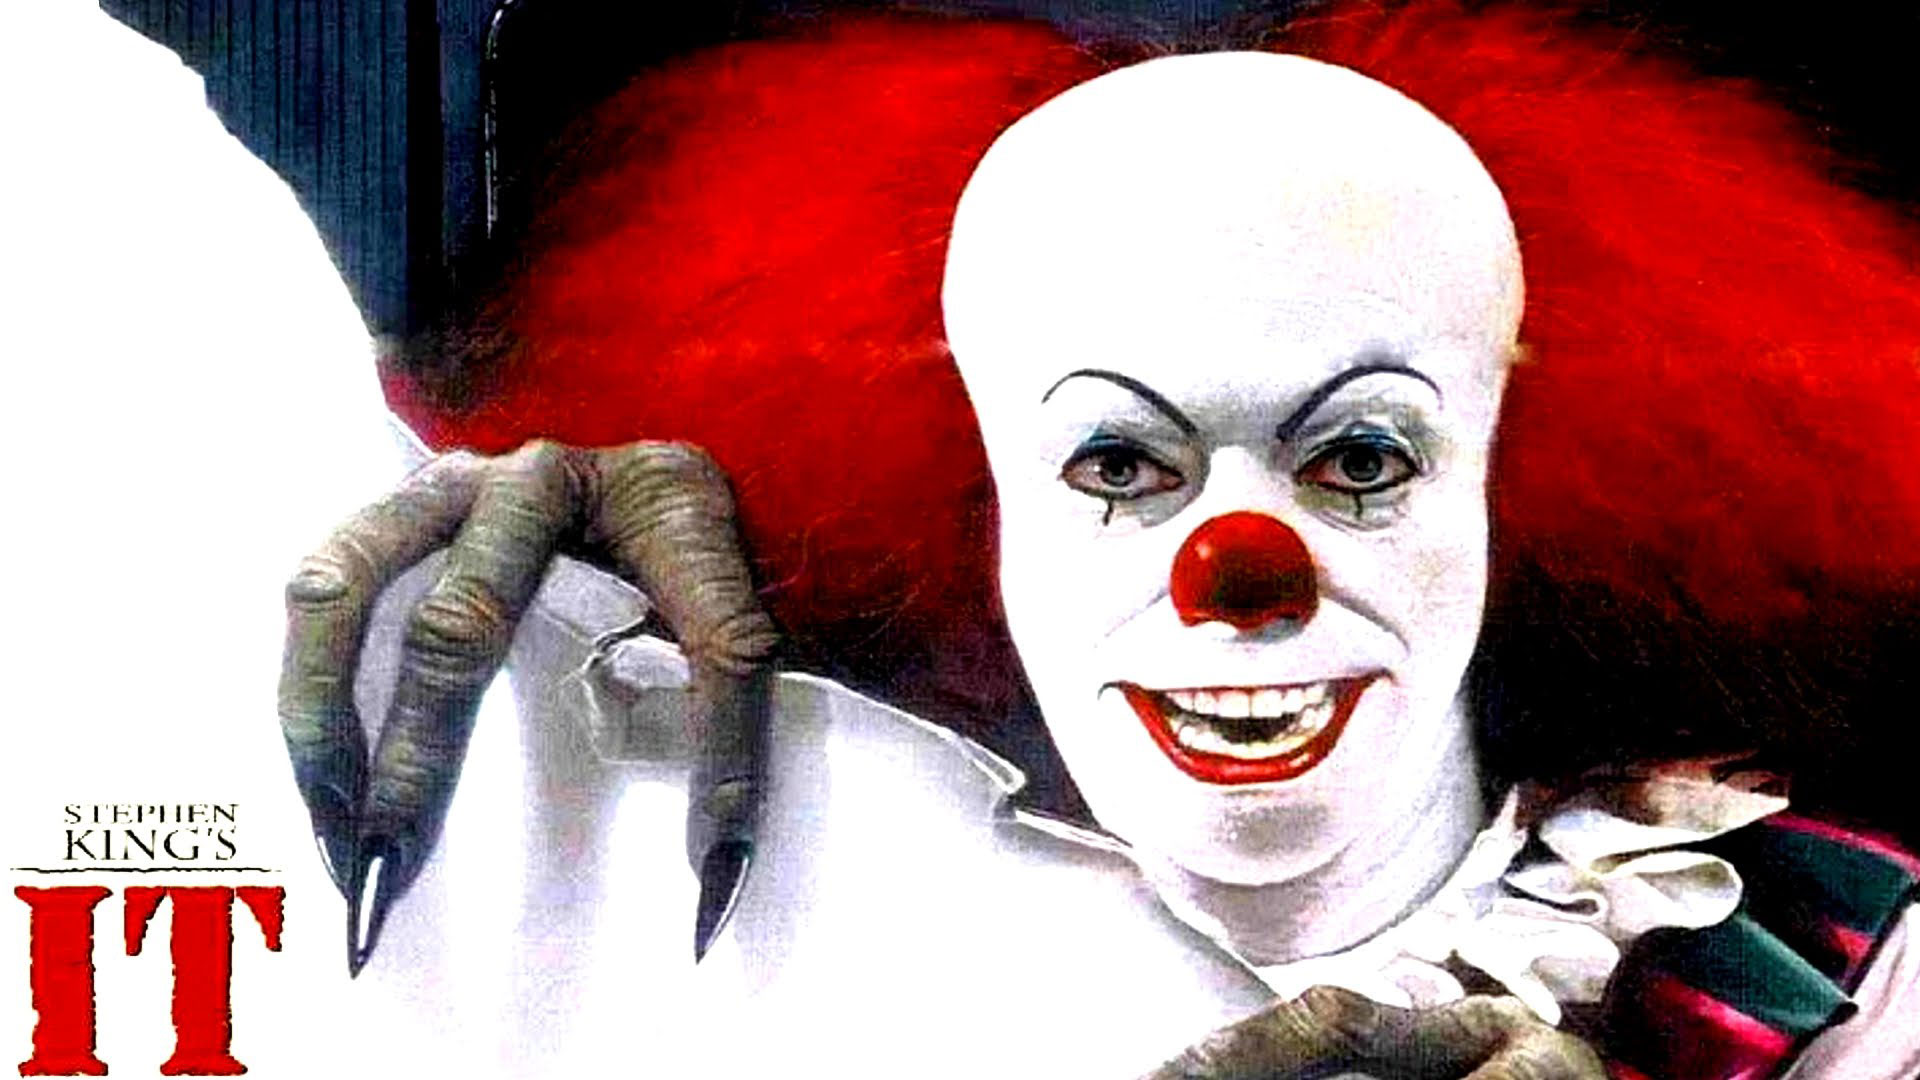 Revisiting the film of Stephen King's It - The Dark Carnival